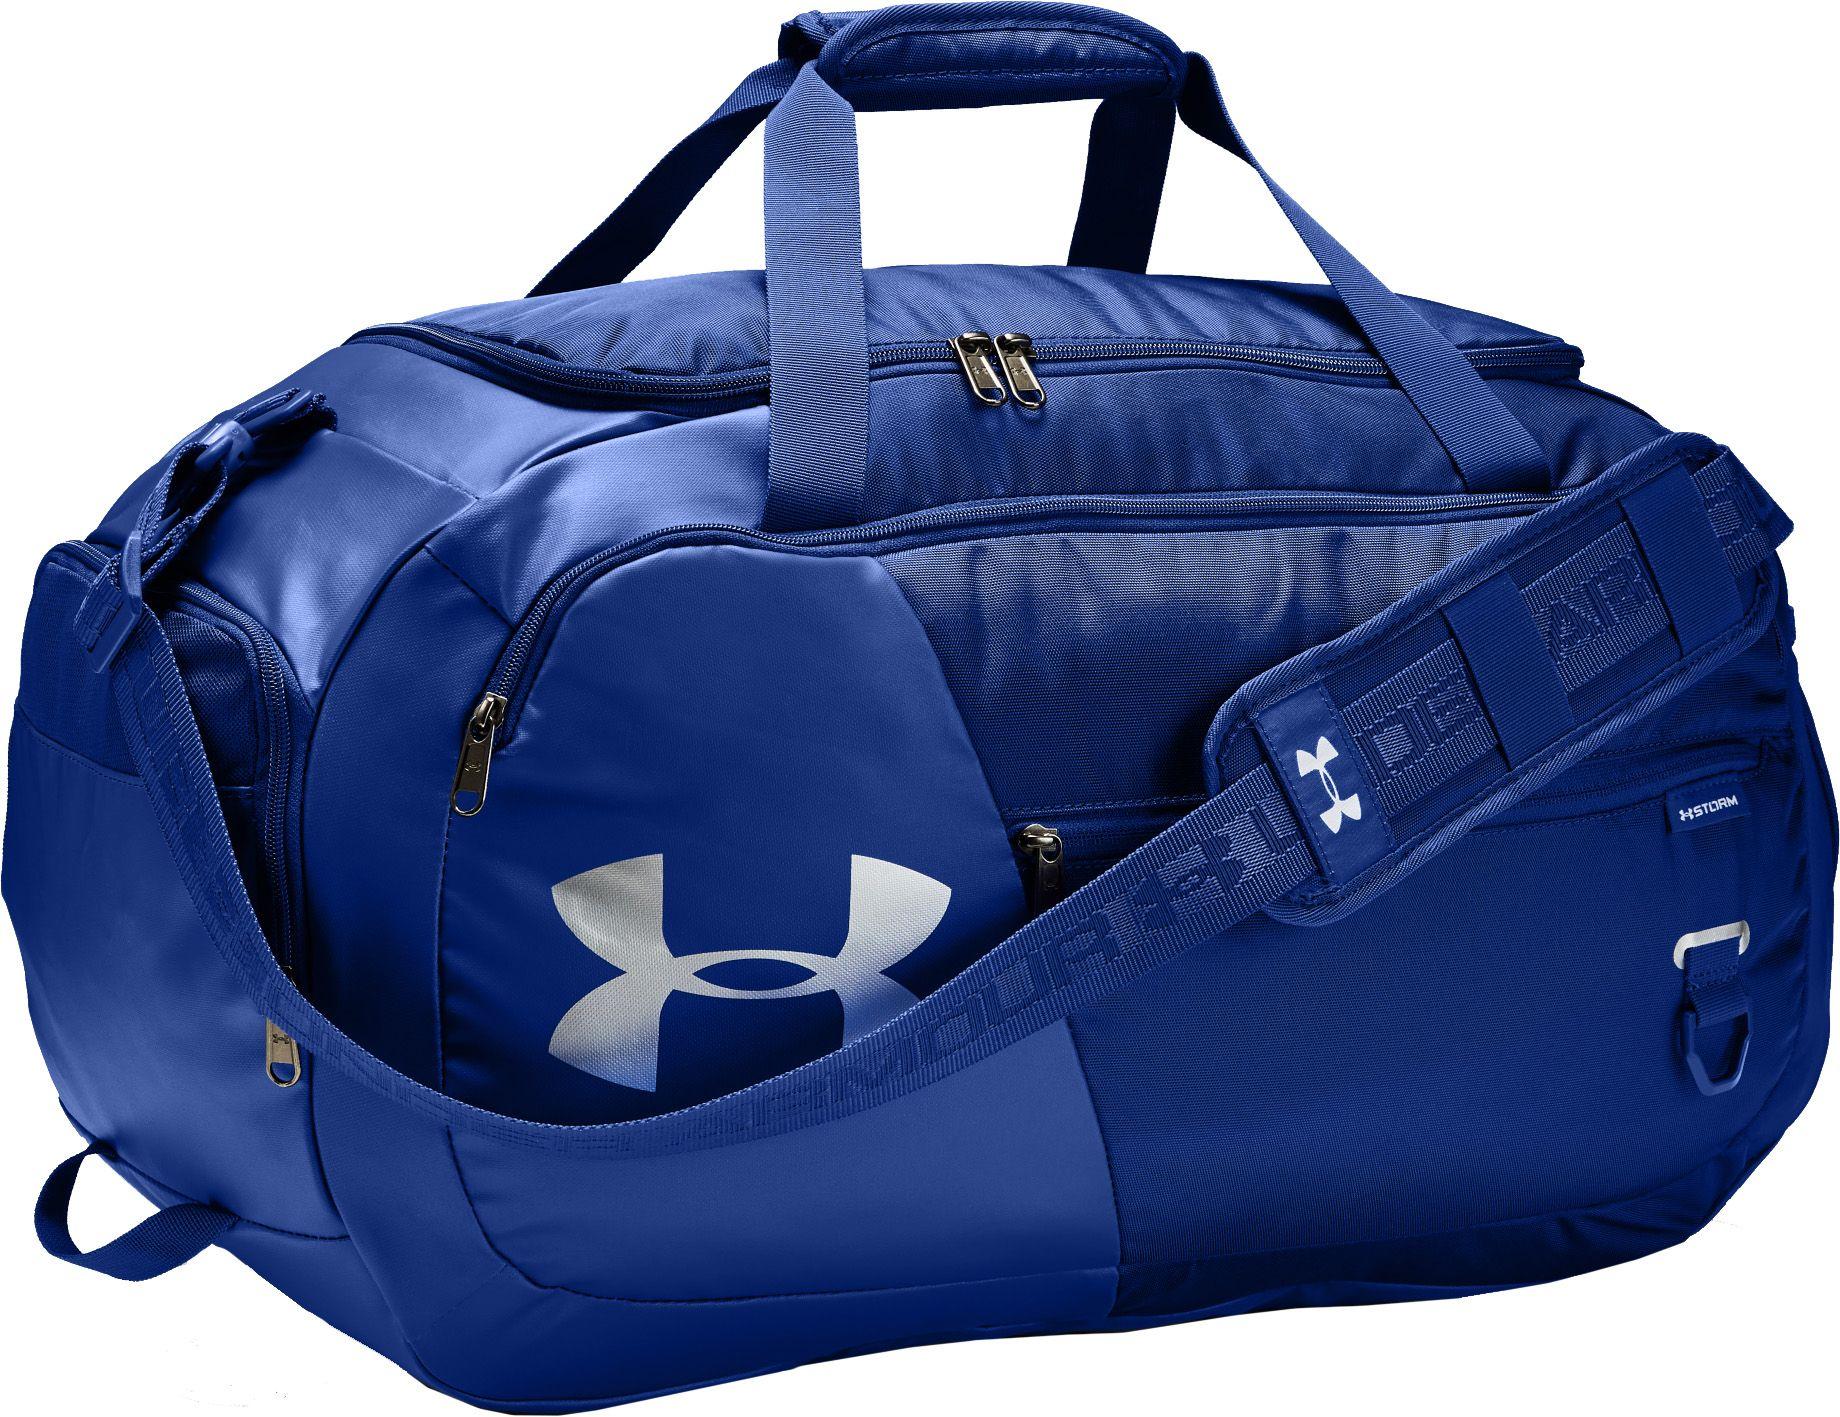 Blue Duffle Bags For Men For Sale :: Keweenaw Bay Indian Community